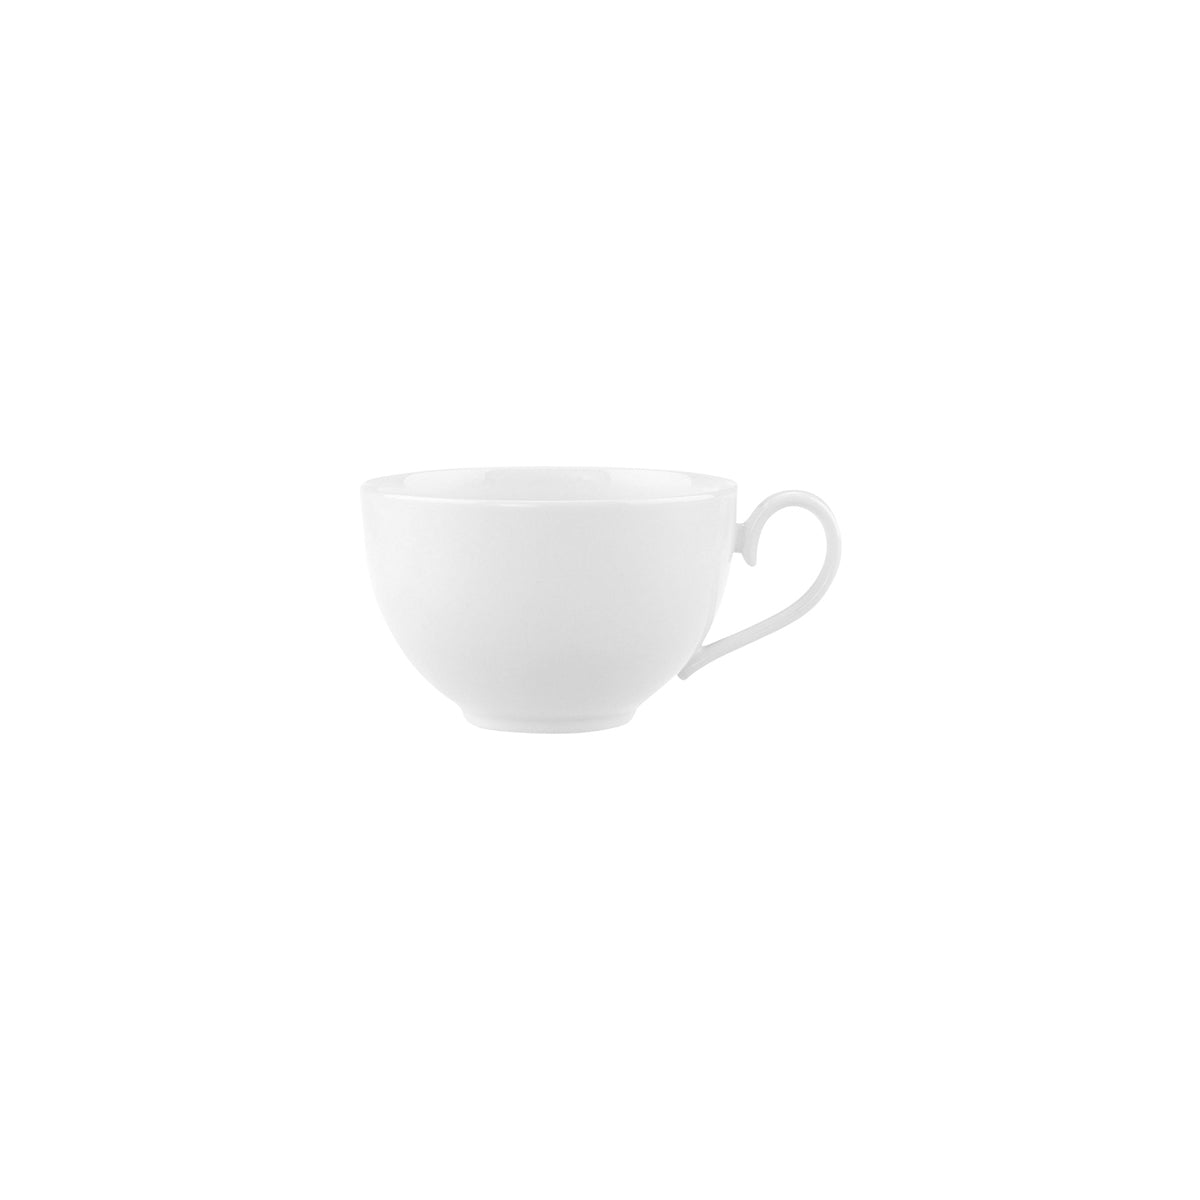 VB16-3272-1270 Villeroy And Boch Villeroy And Boch Stella Hotel White Cup 260ml Tomkin Australia Hospitality Supplies